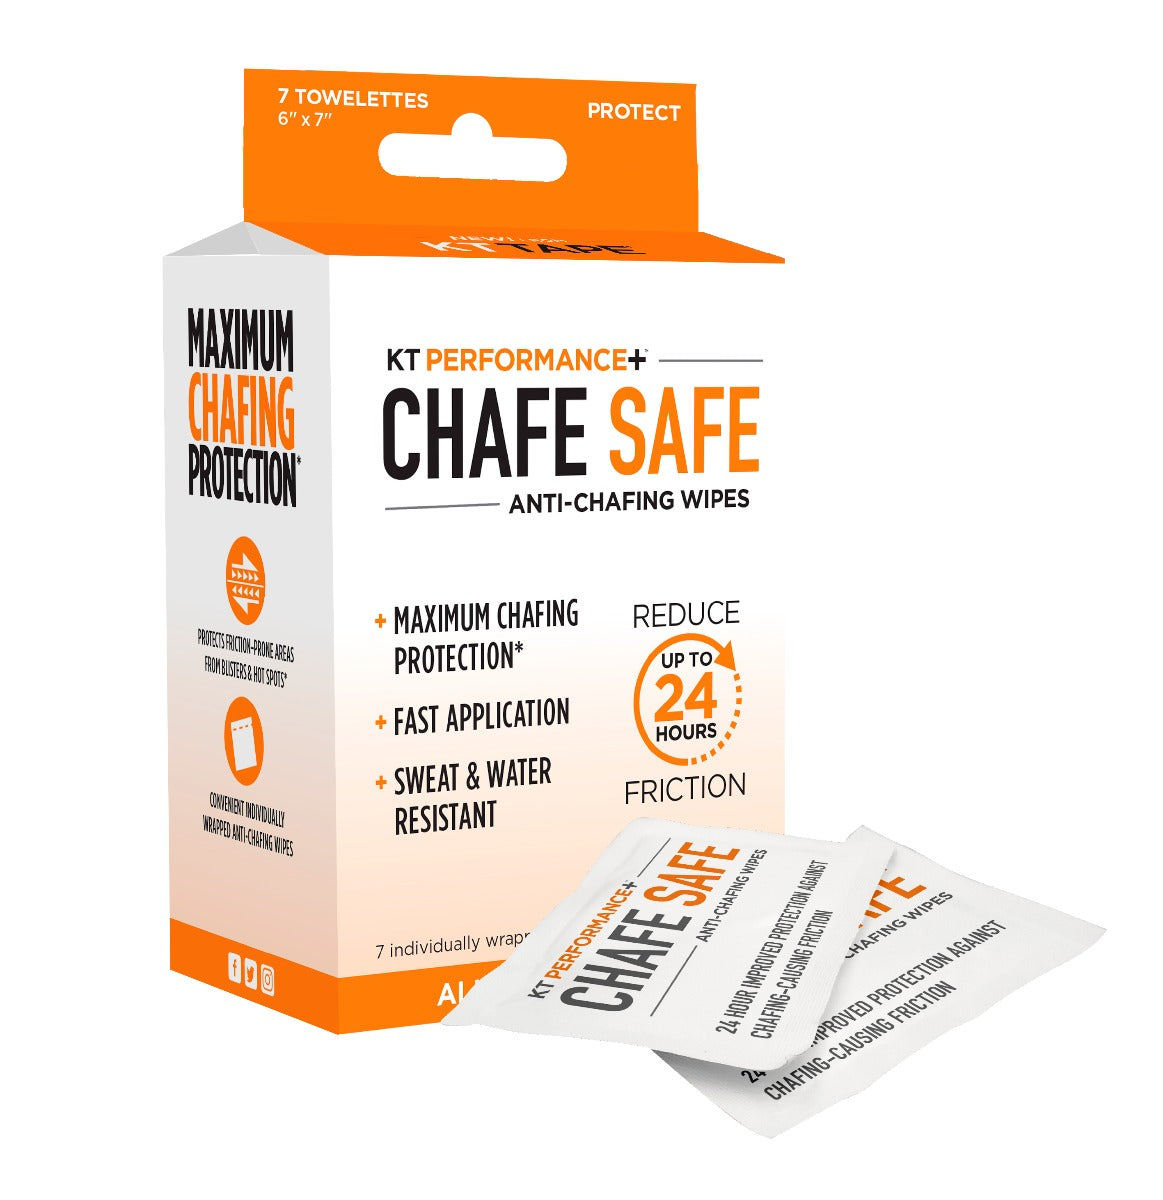 KT Health Chafe Safe™ Anti-Chafing Wipes - Prevent Chafing Up To